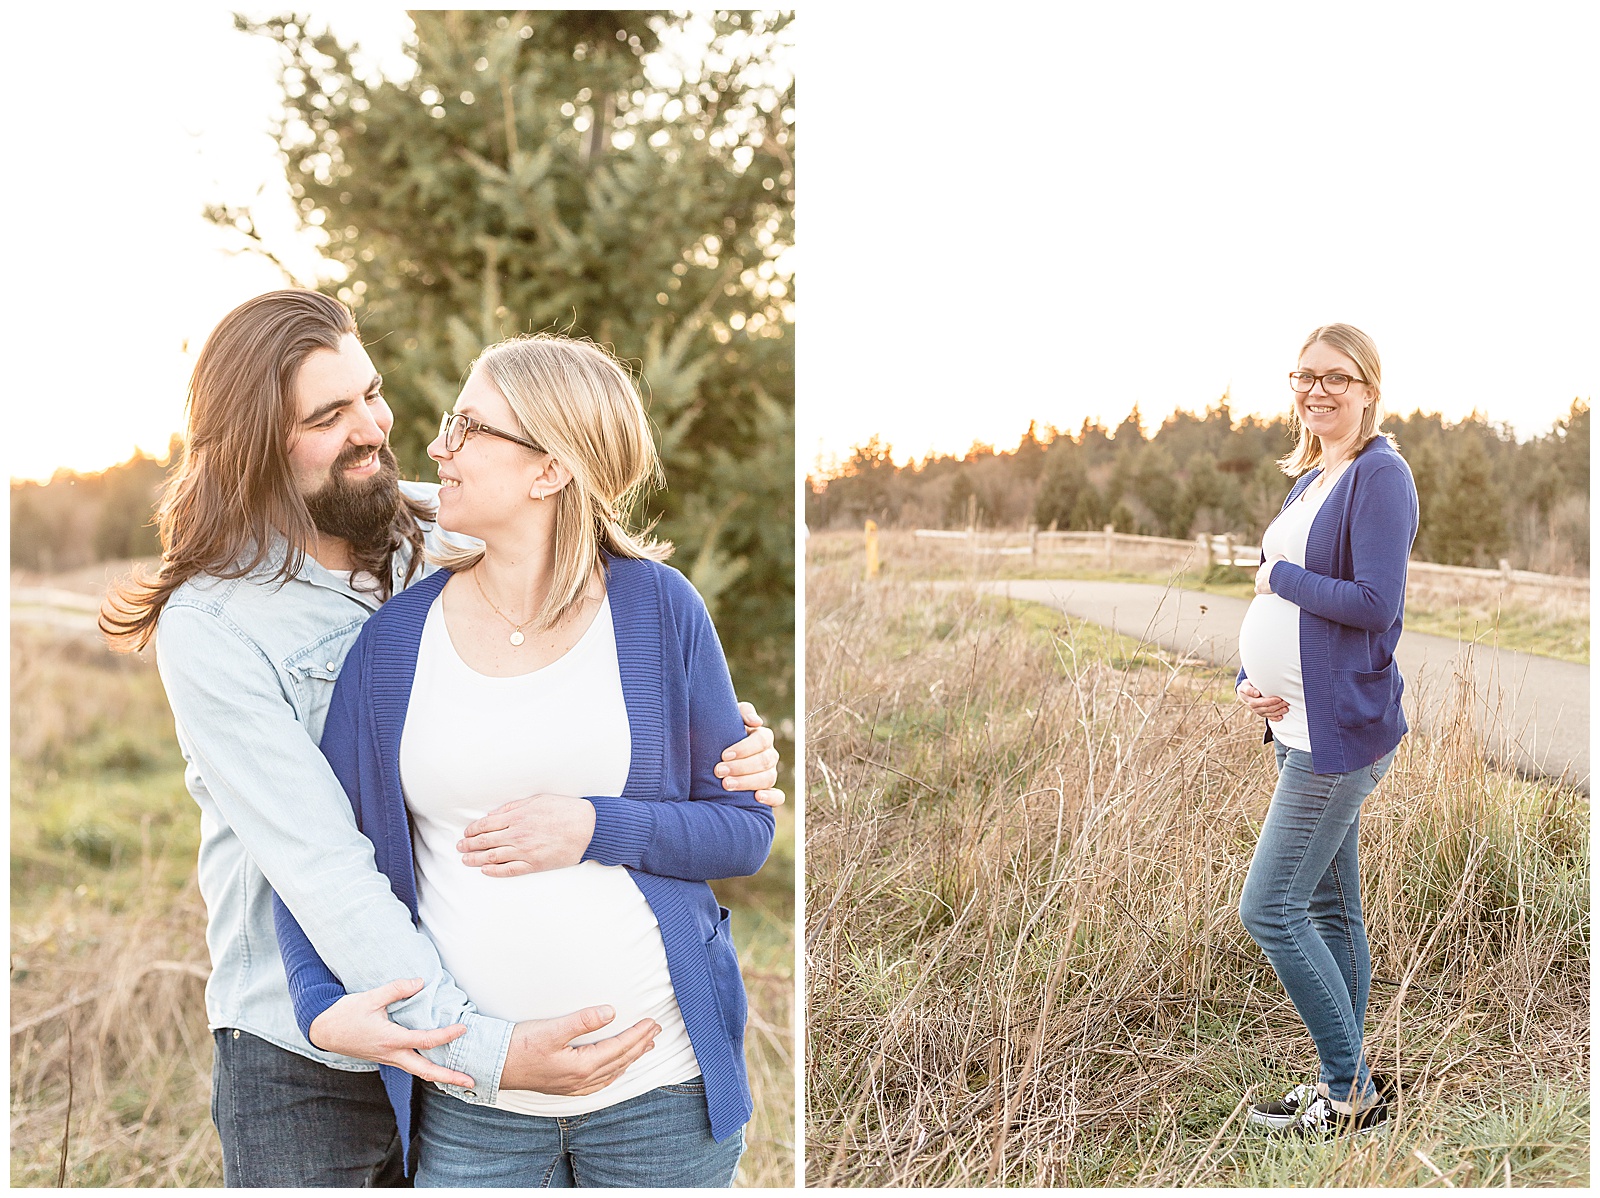 Pregnant Mom in white shirt and blue sweater out in nature